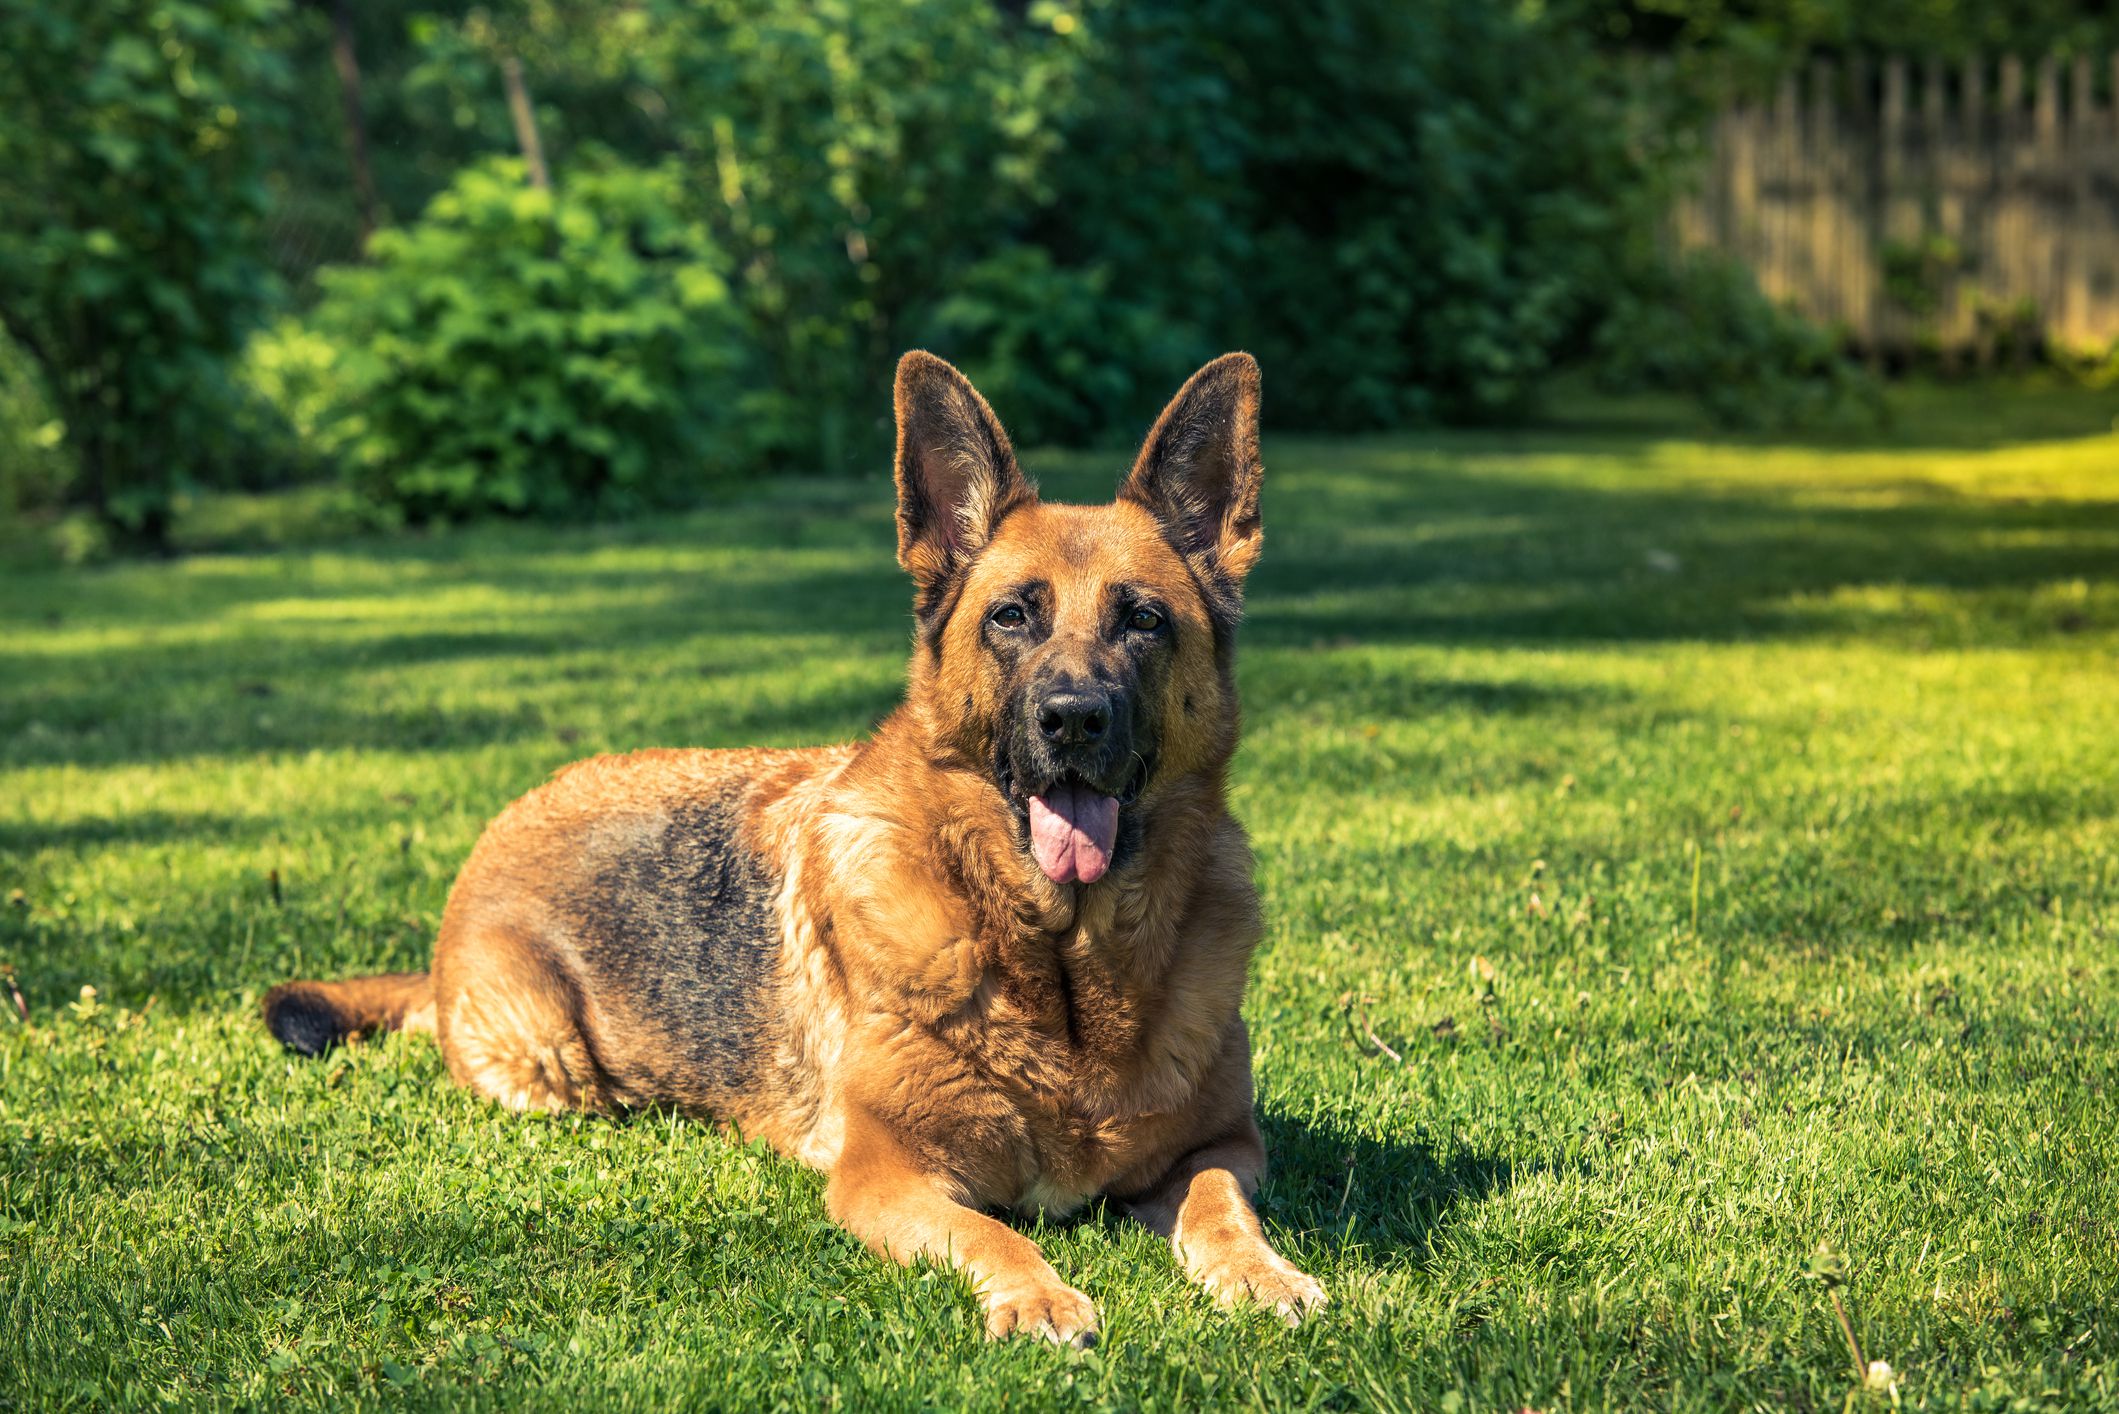 How to Adopt Retired Police Dogs